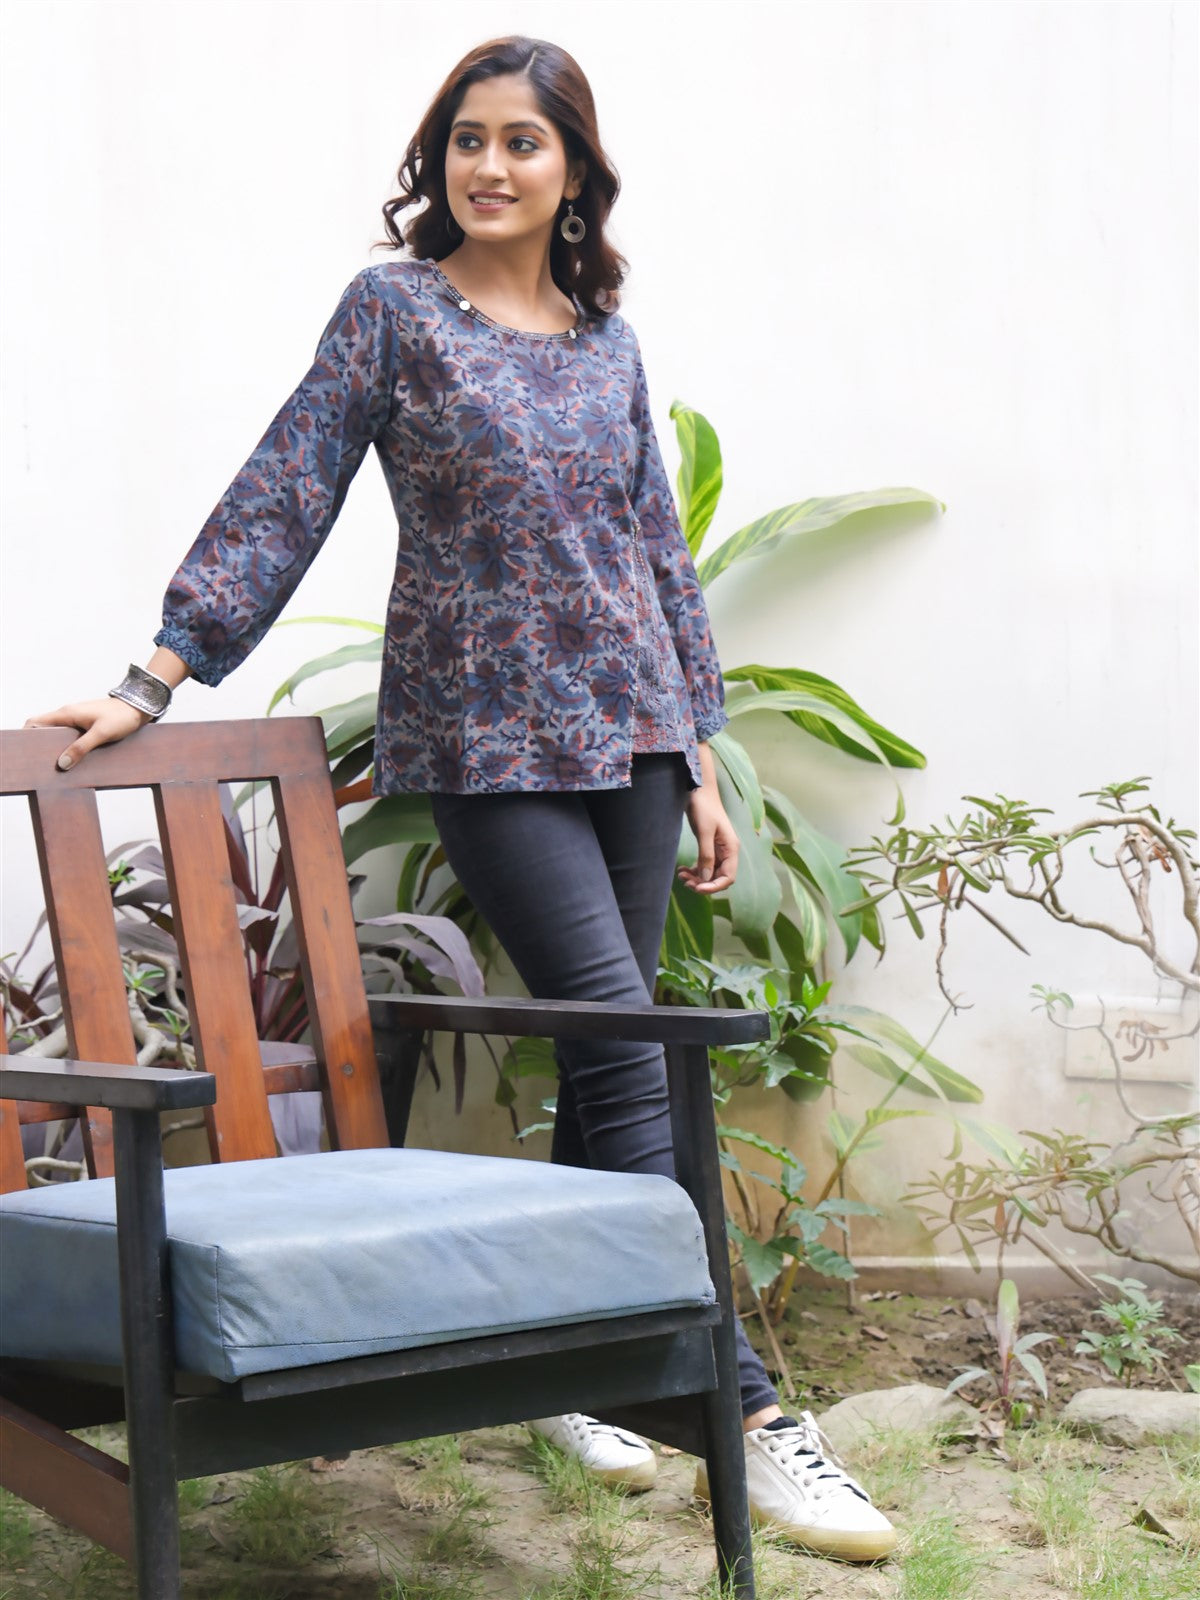 Blue Ajrakh Block Printed Kali Top With Kantha Hand Embroidery Detailing